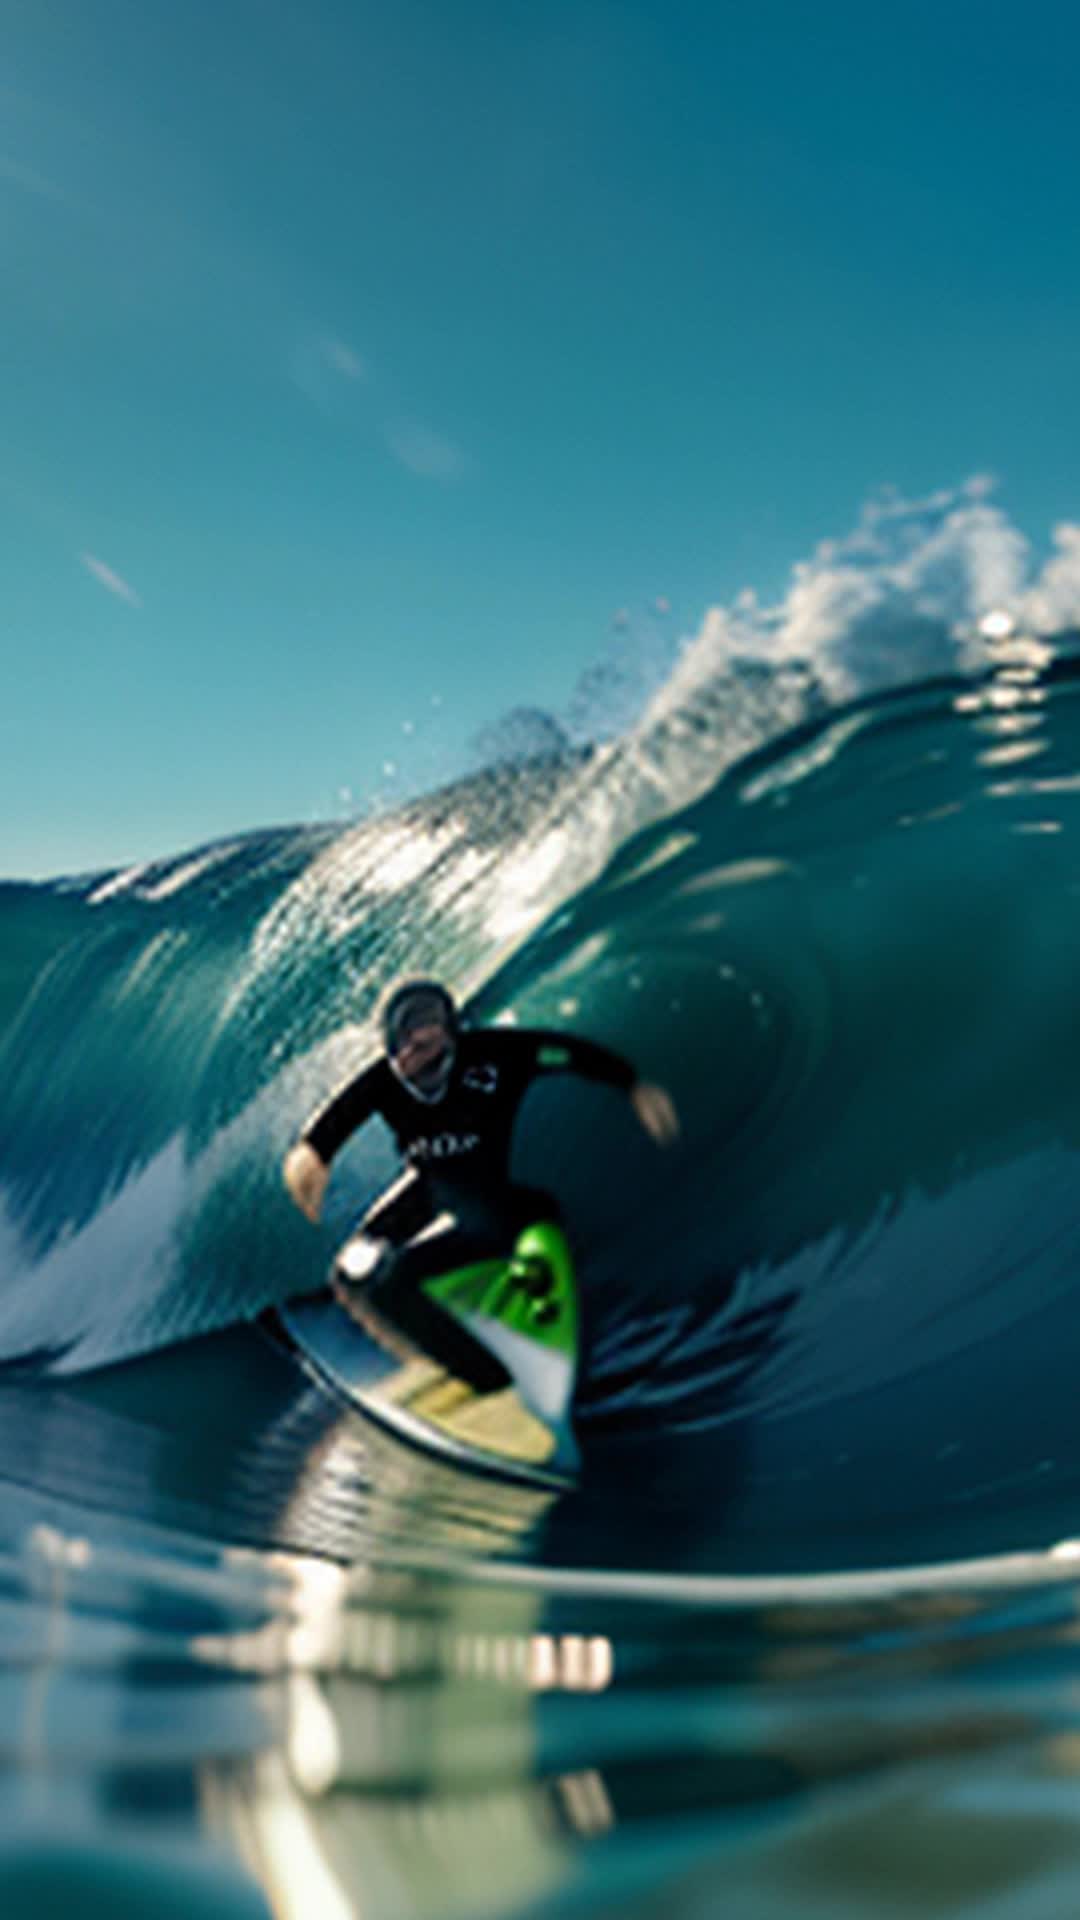 Man body surfing on boogie board, wearing fins, wetsuit, riding big wave, wave starting to barrel, water splashing, clear blue ocean, sunlight reflecting off water, highenergy action, wideangle shot, sharp focus, dynamic movement, ocean spray in the air, wave cresting, vibrant colors, cinematic feel, rendered by octane